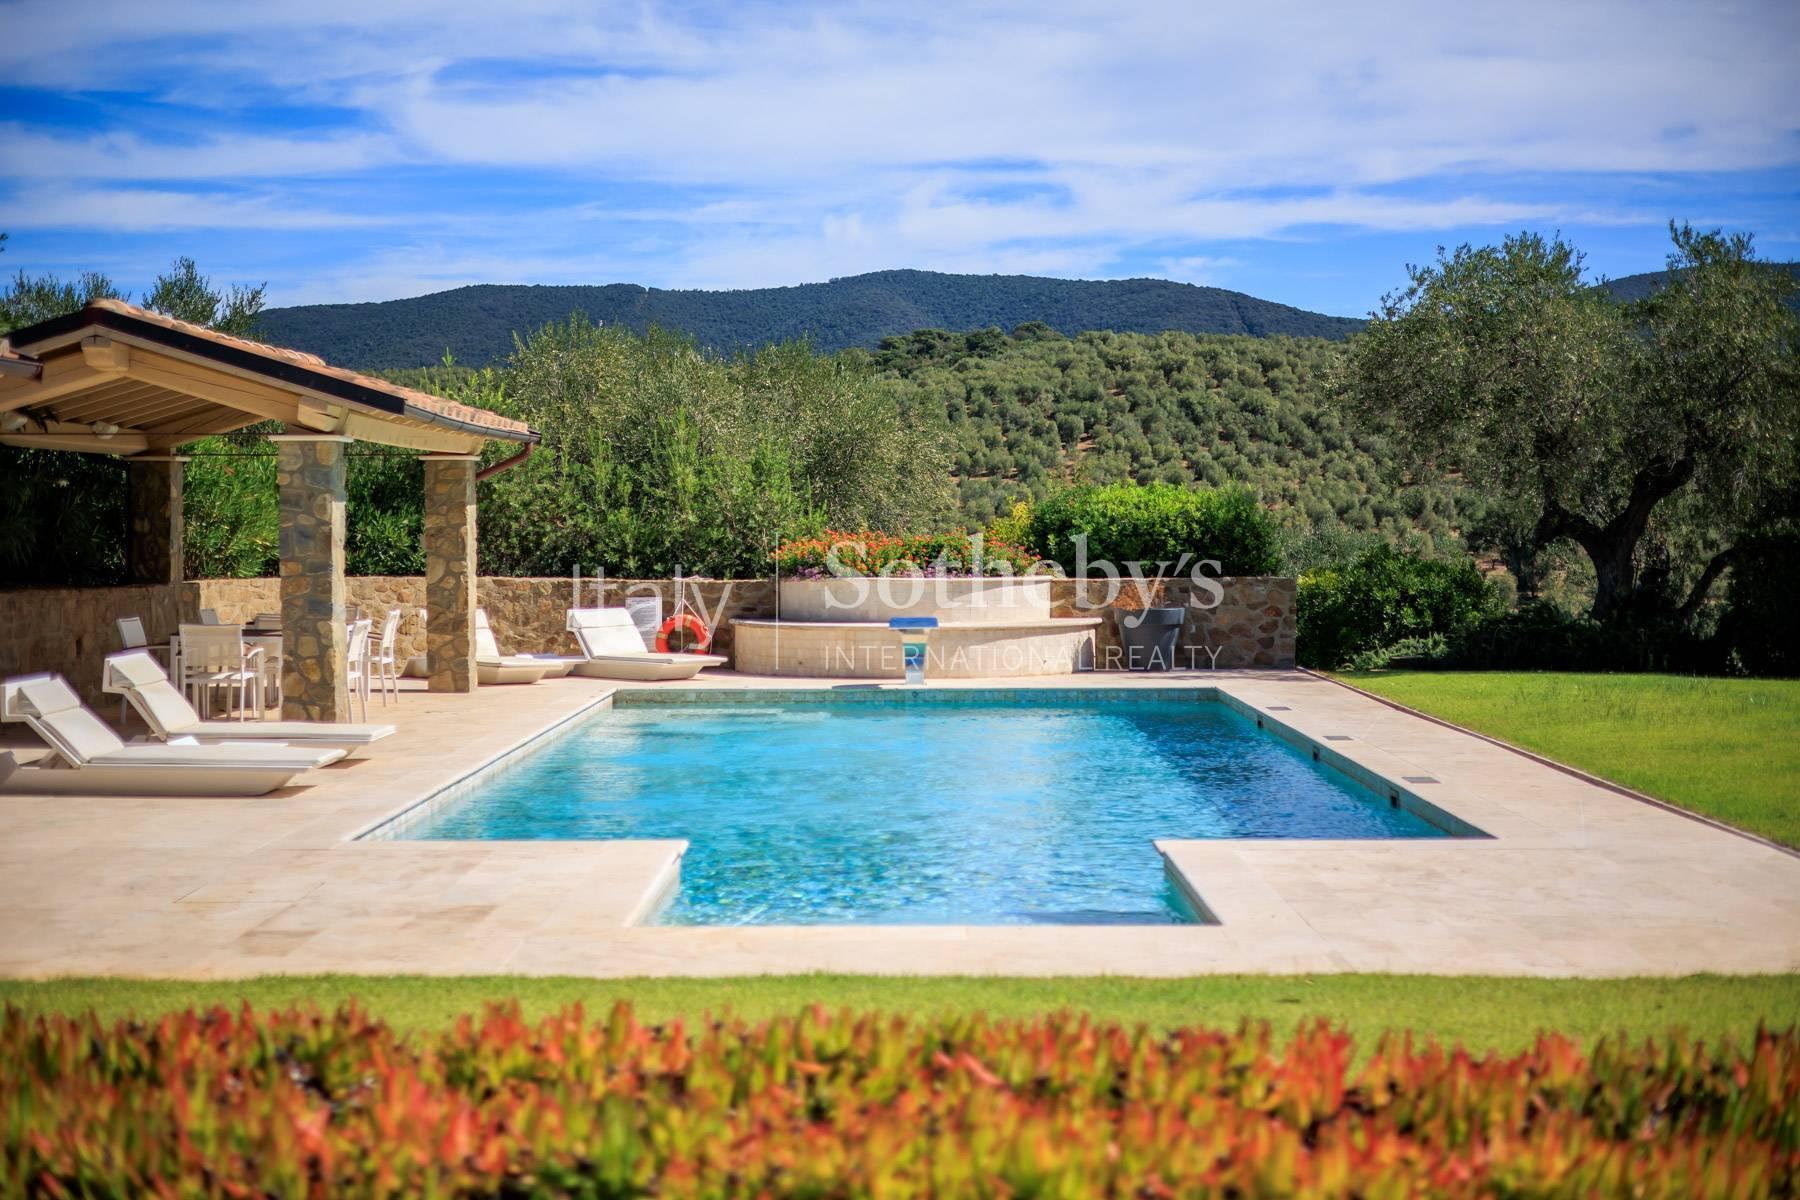 Inspiring tuscan estate with vineyards and olive groves - 5